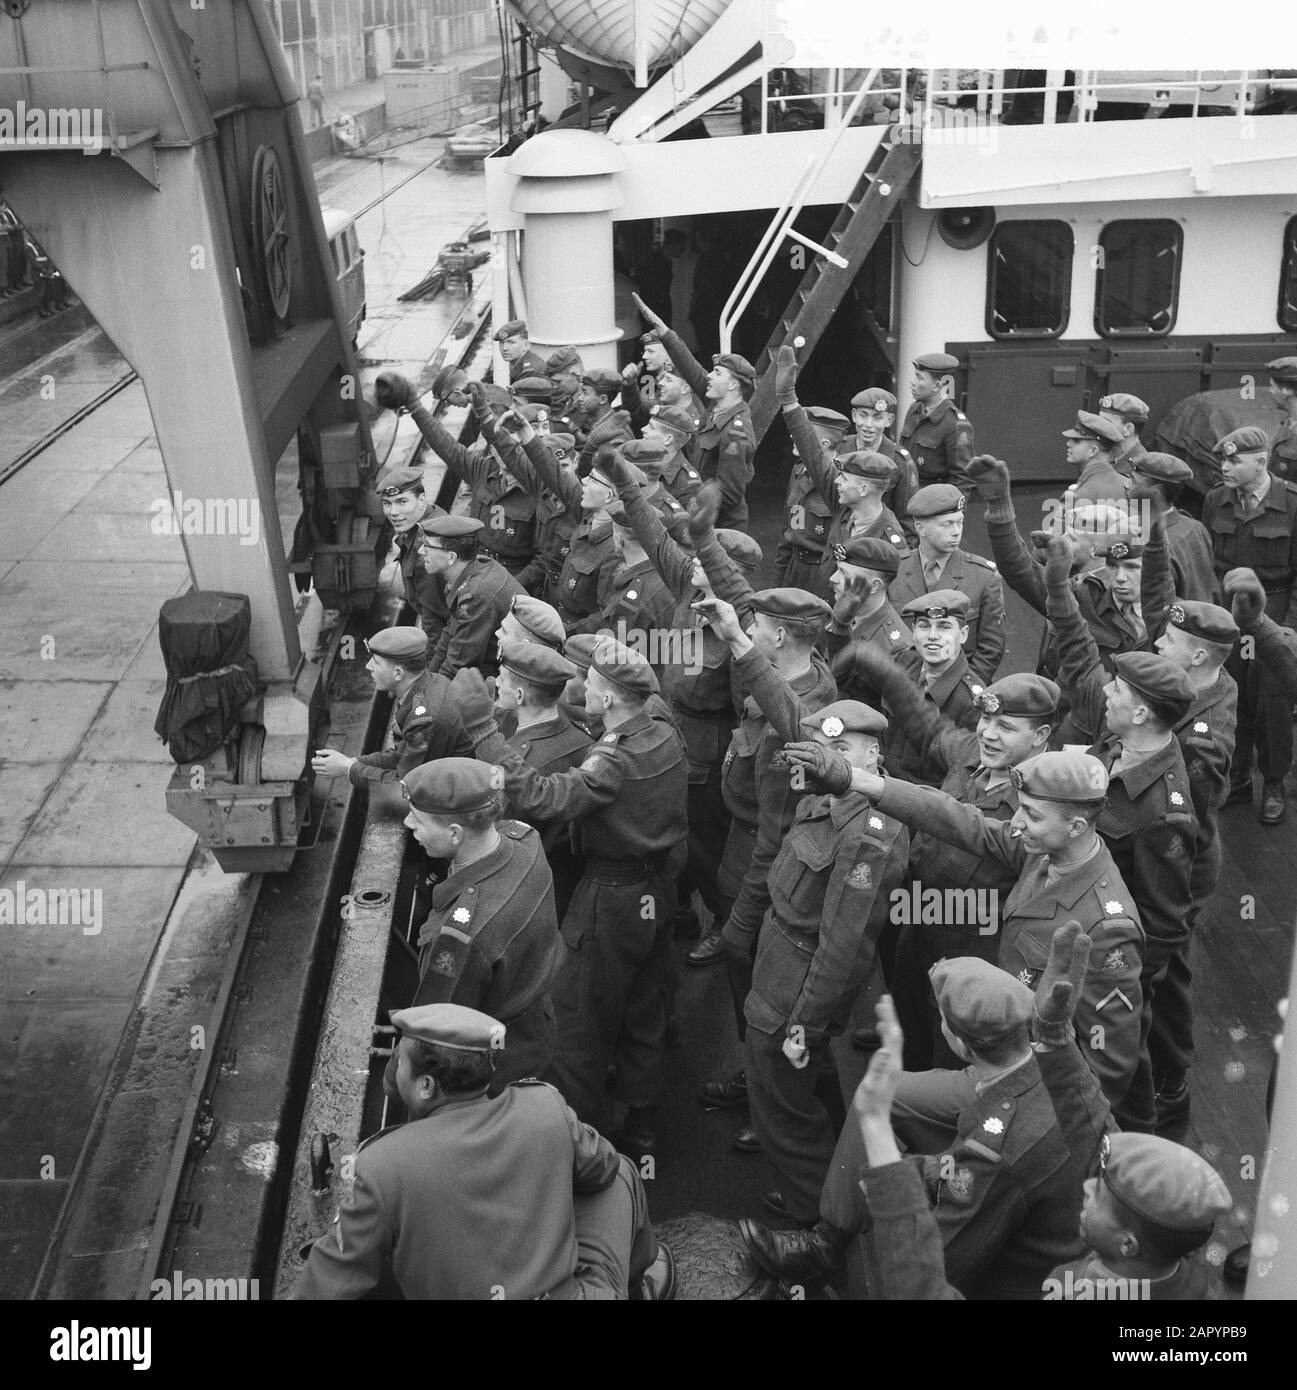 Departure first detachment of the first Surinamese company per Ms. Willemstad to Suriname, soldiers waving at farewell Date: 13 January 1961 Location: Suriname Keywords: FEED, COMPAGNIES, DETACHEMENTS, Soldiers Institution name: MS Willemstad Stock Photo